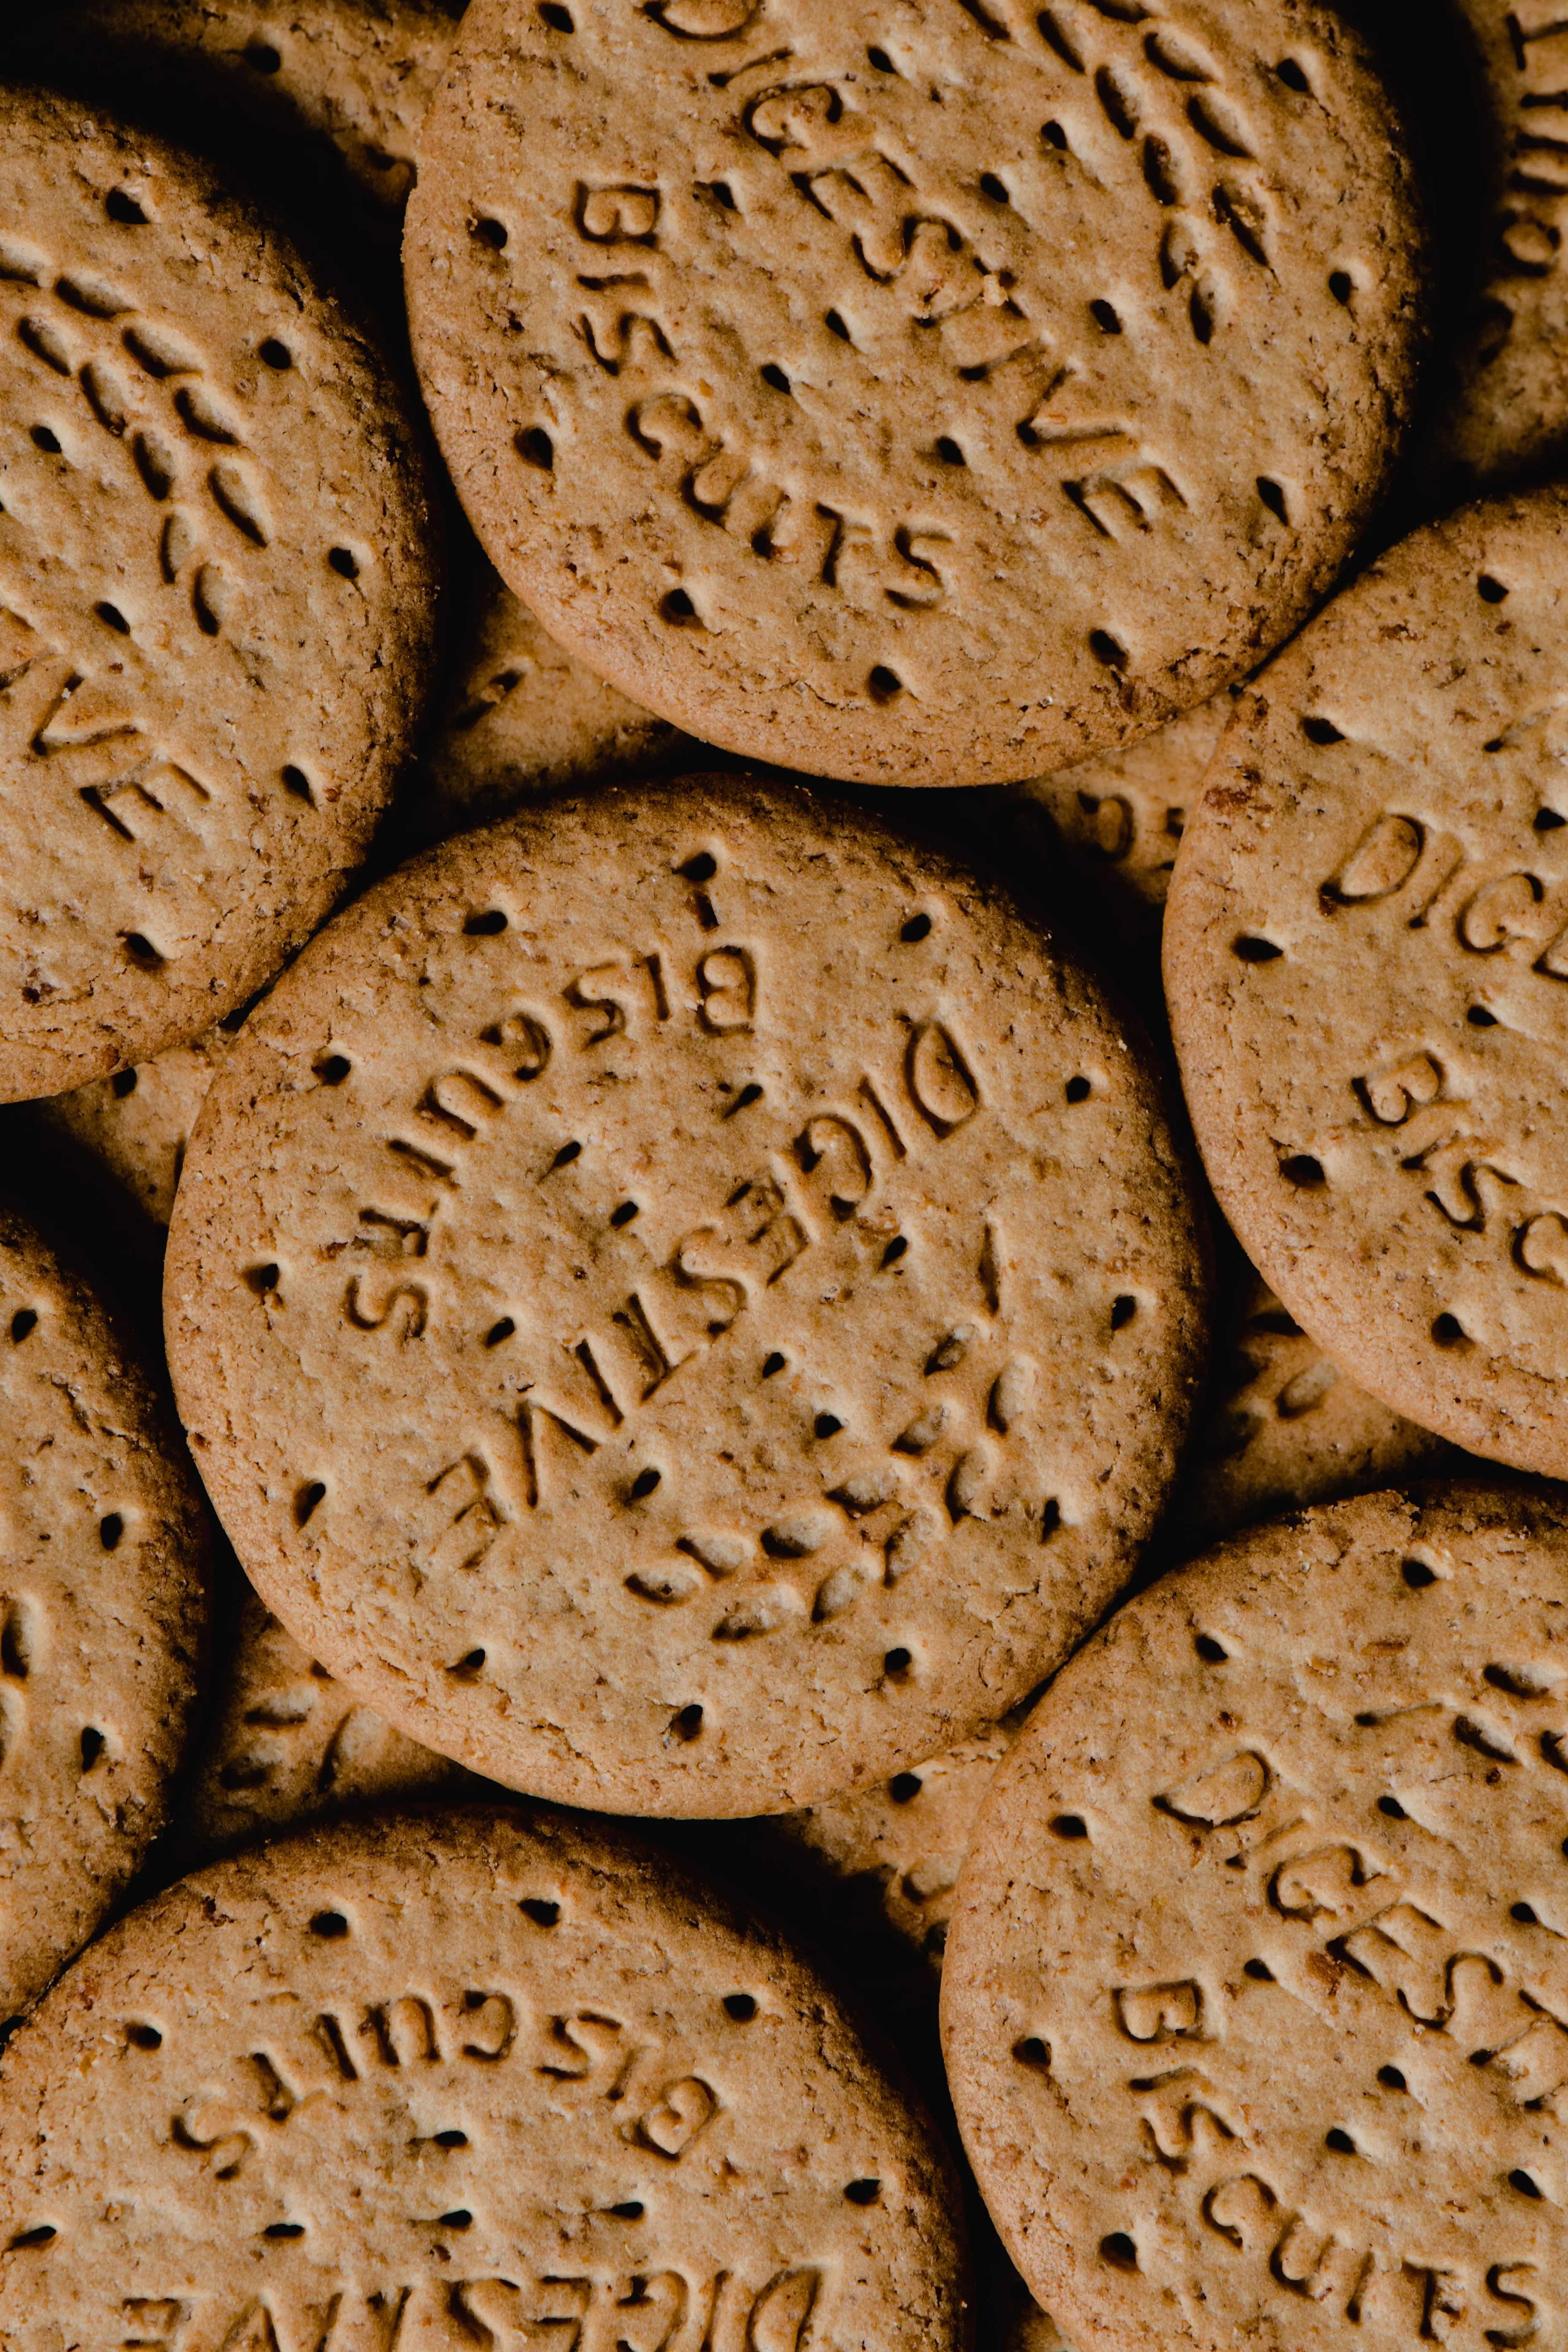 Surely Digestive biscuits are harmless, right? Wrong.